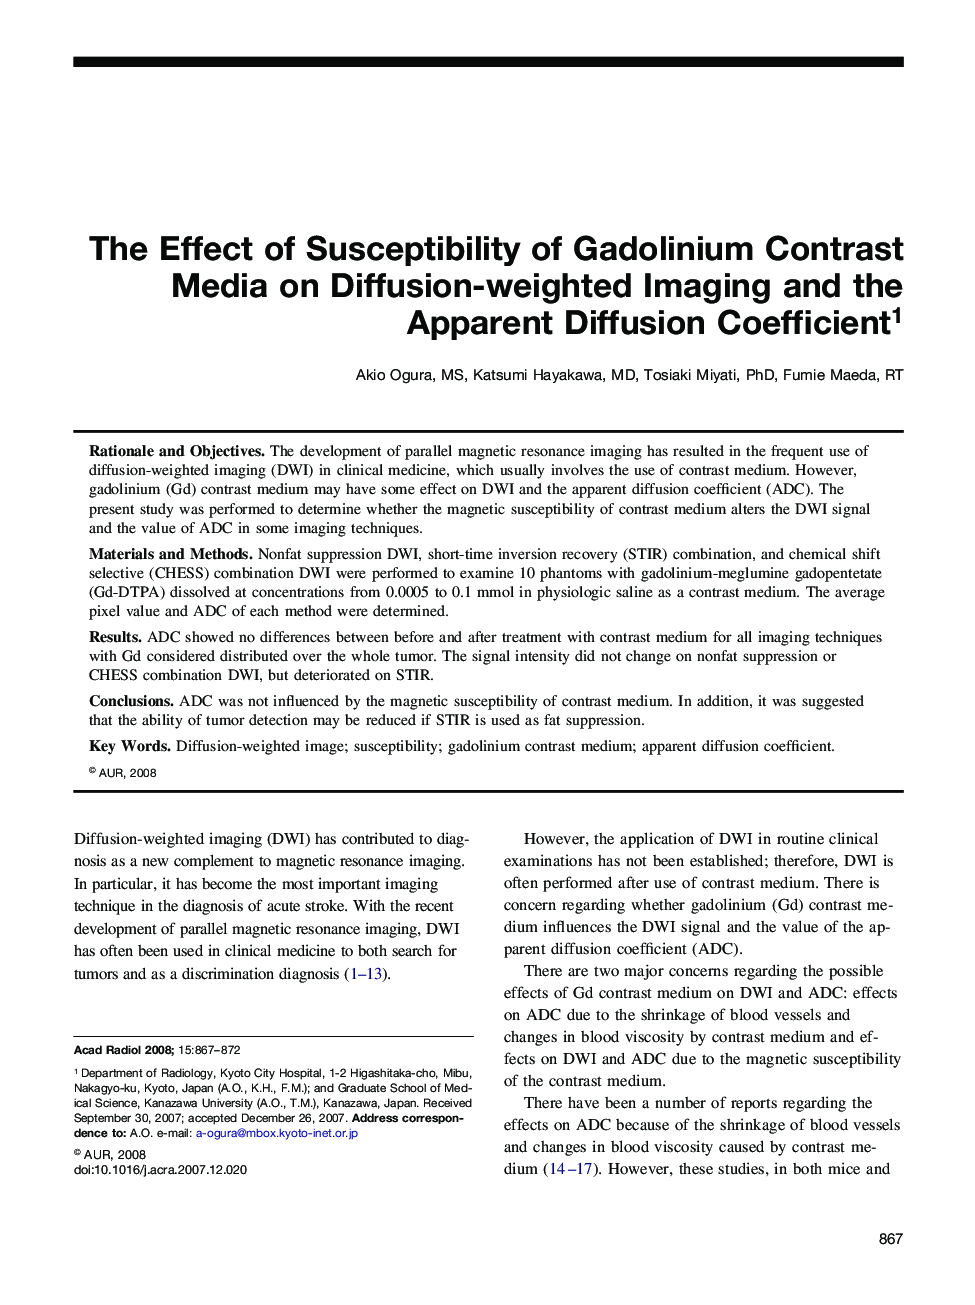 The Effect of Susceptibility of Gadolinium Contrast Media on Diffusion-weighted Imaging and the Apparent Diffusion Coefficient